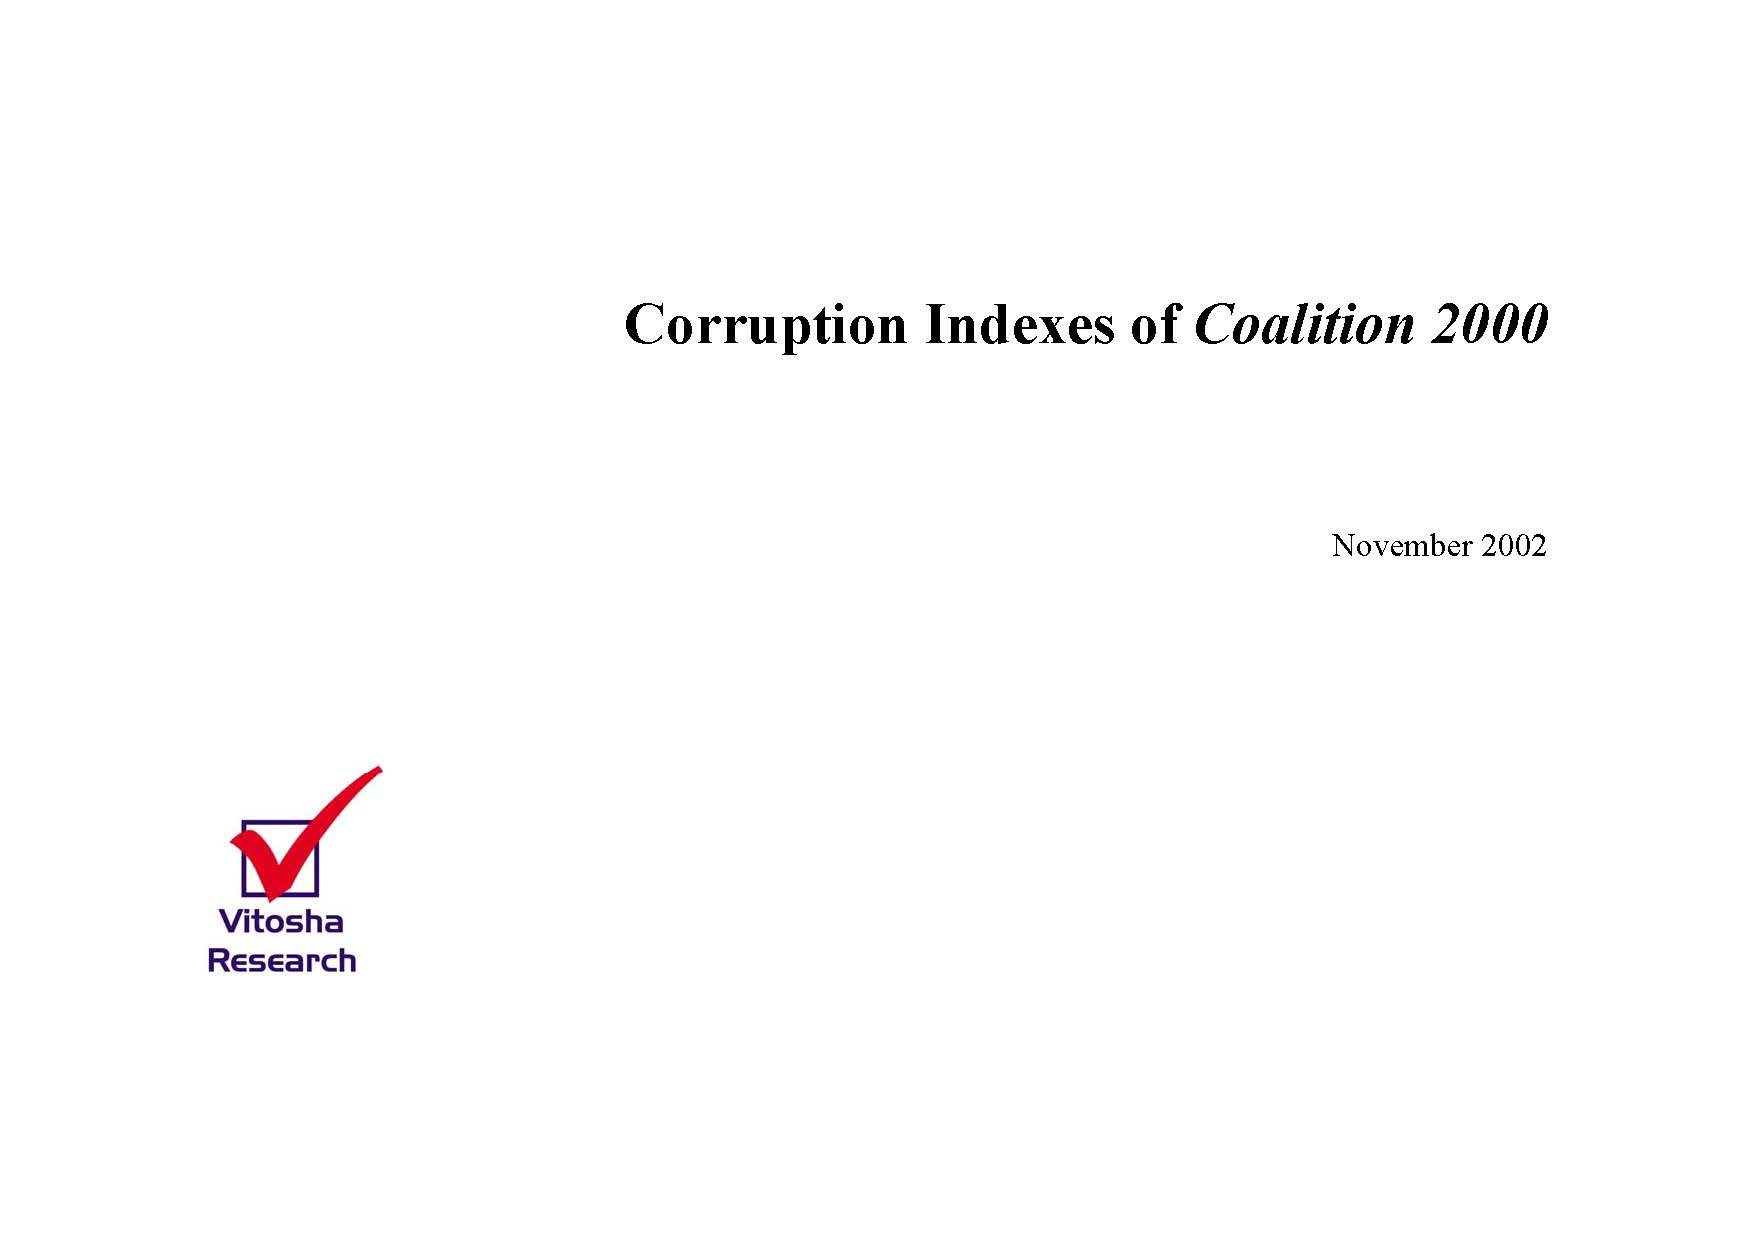 Corruption Indexes of Coalition 2000, October 2002